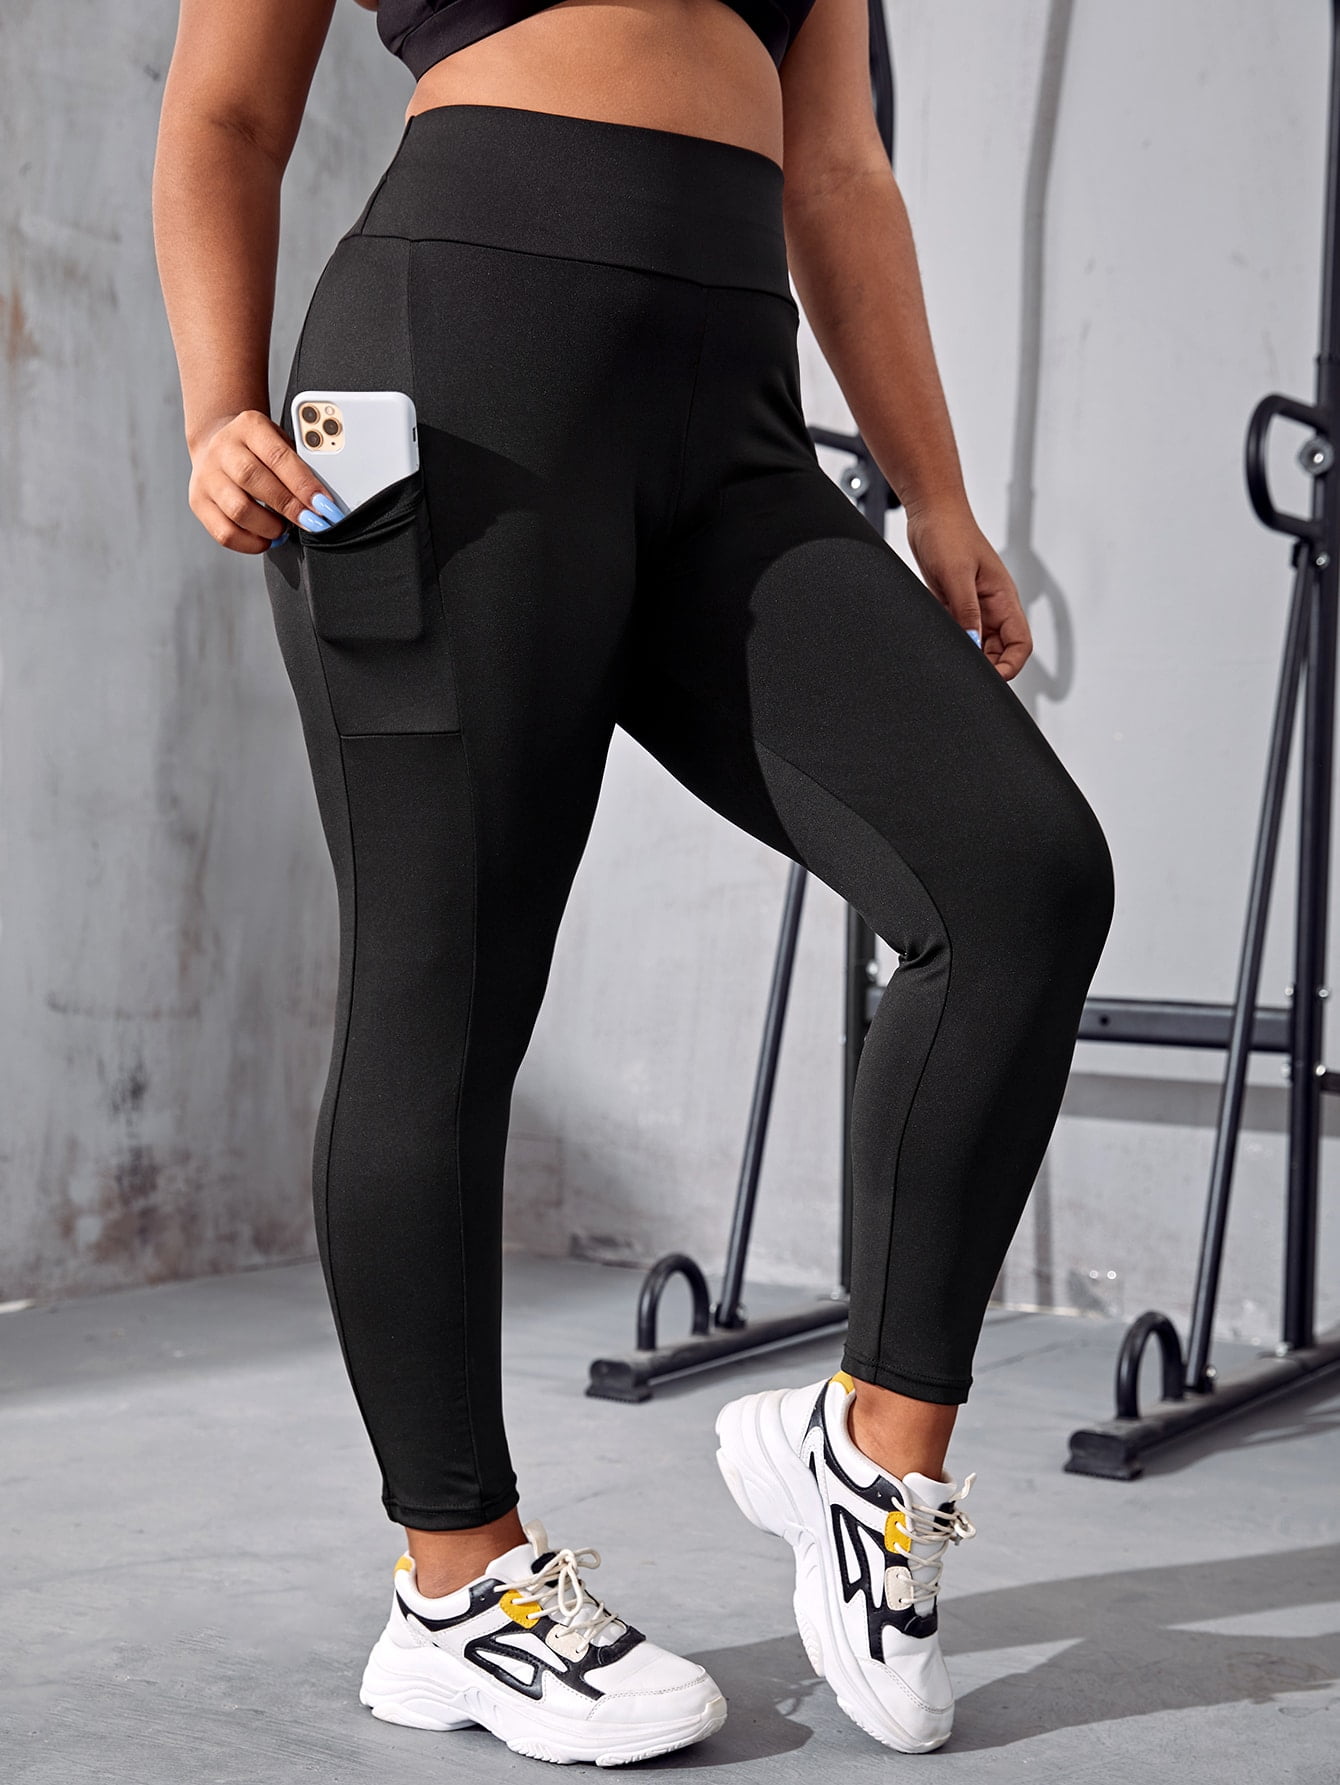 Women's Yoga Workout Trousers Running Active Cycling Leggings with Pockets 